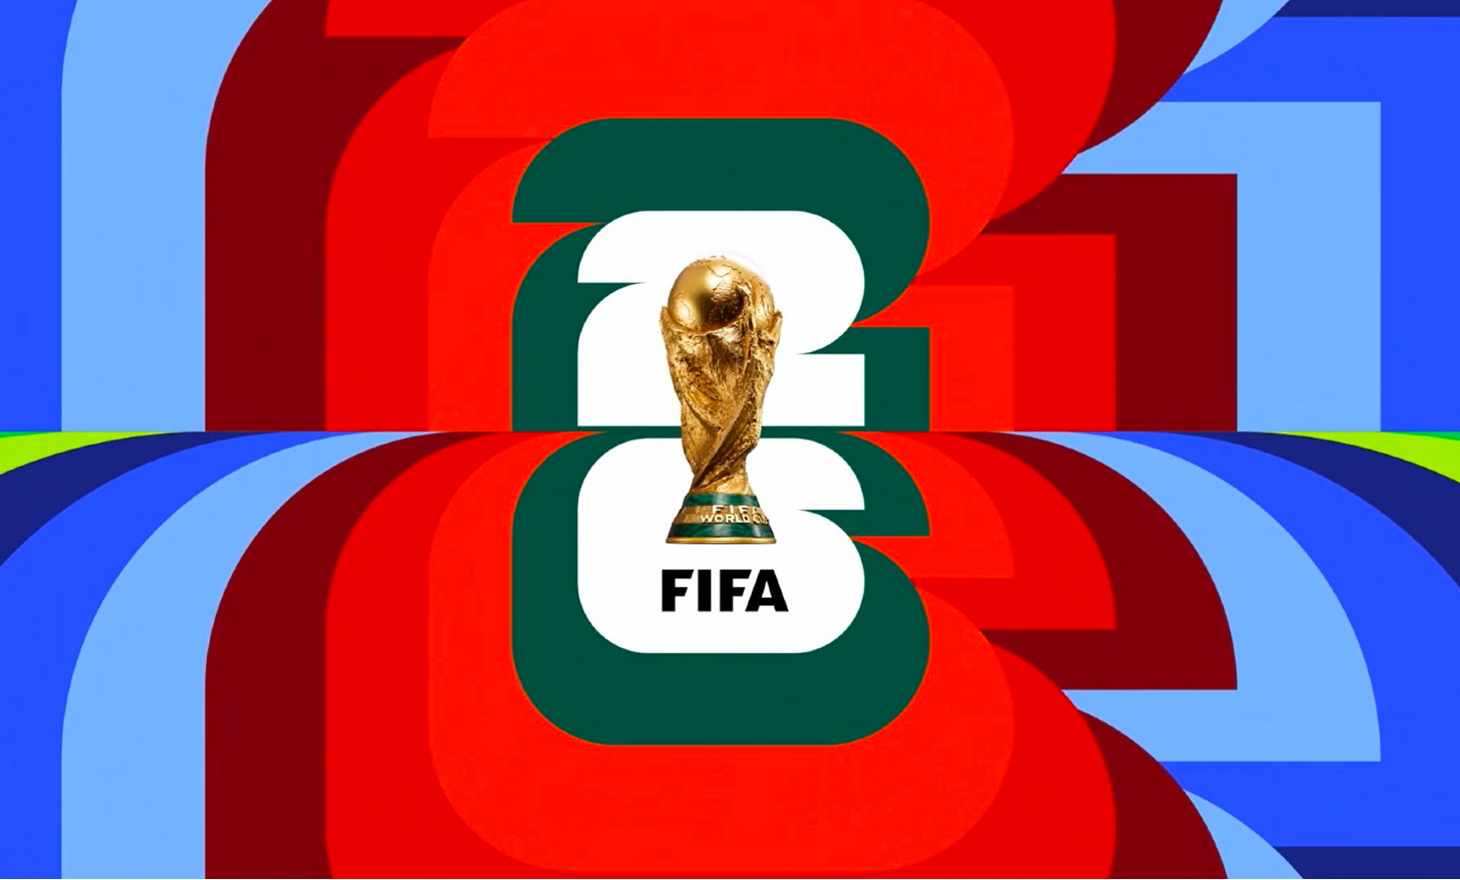 For Soccer Looks Ahead to the 2026 World Cup - FOR SOCCER